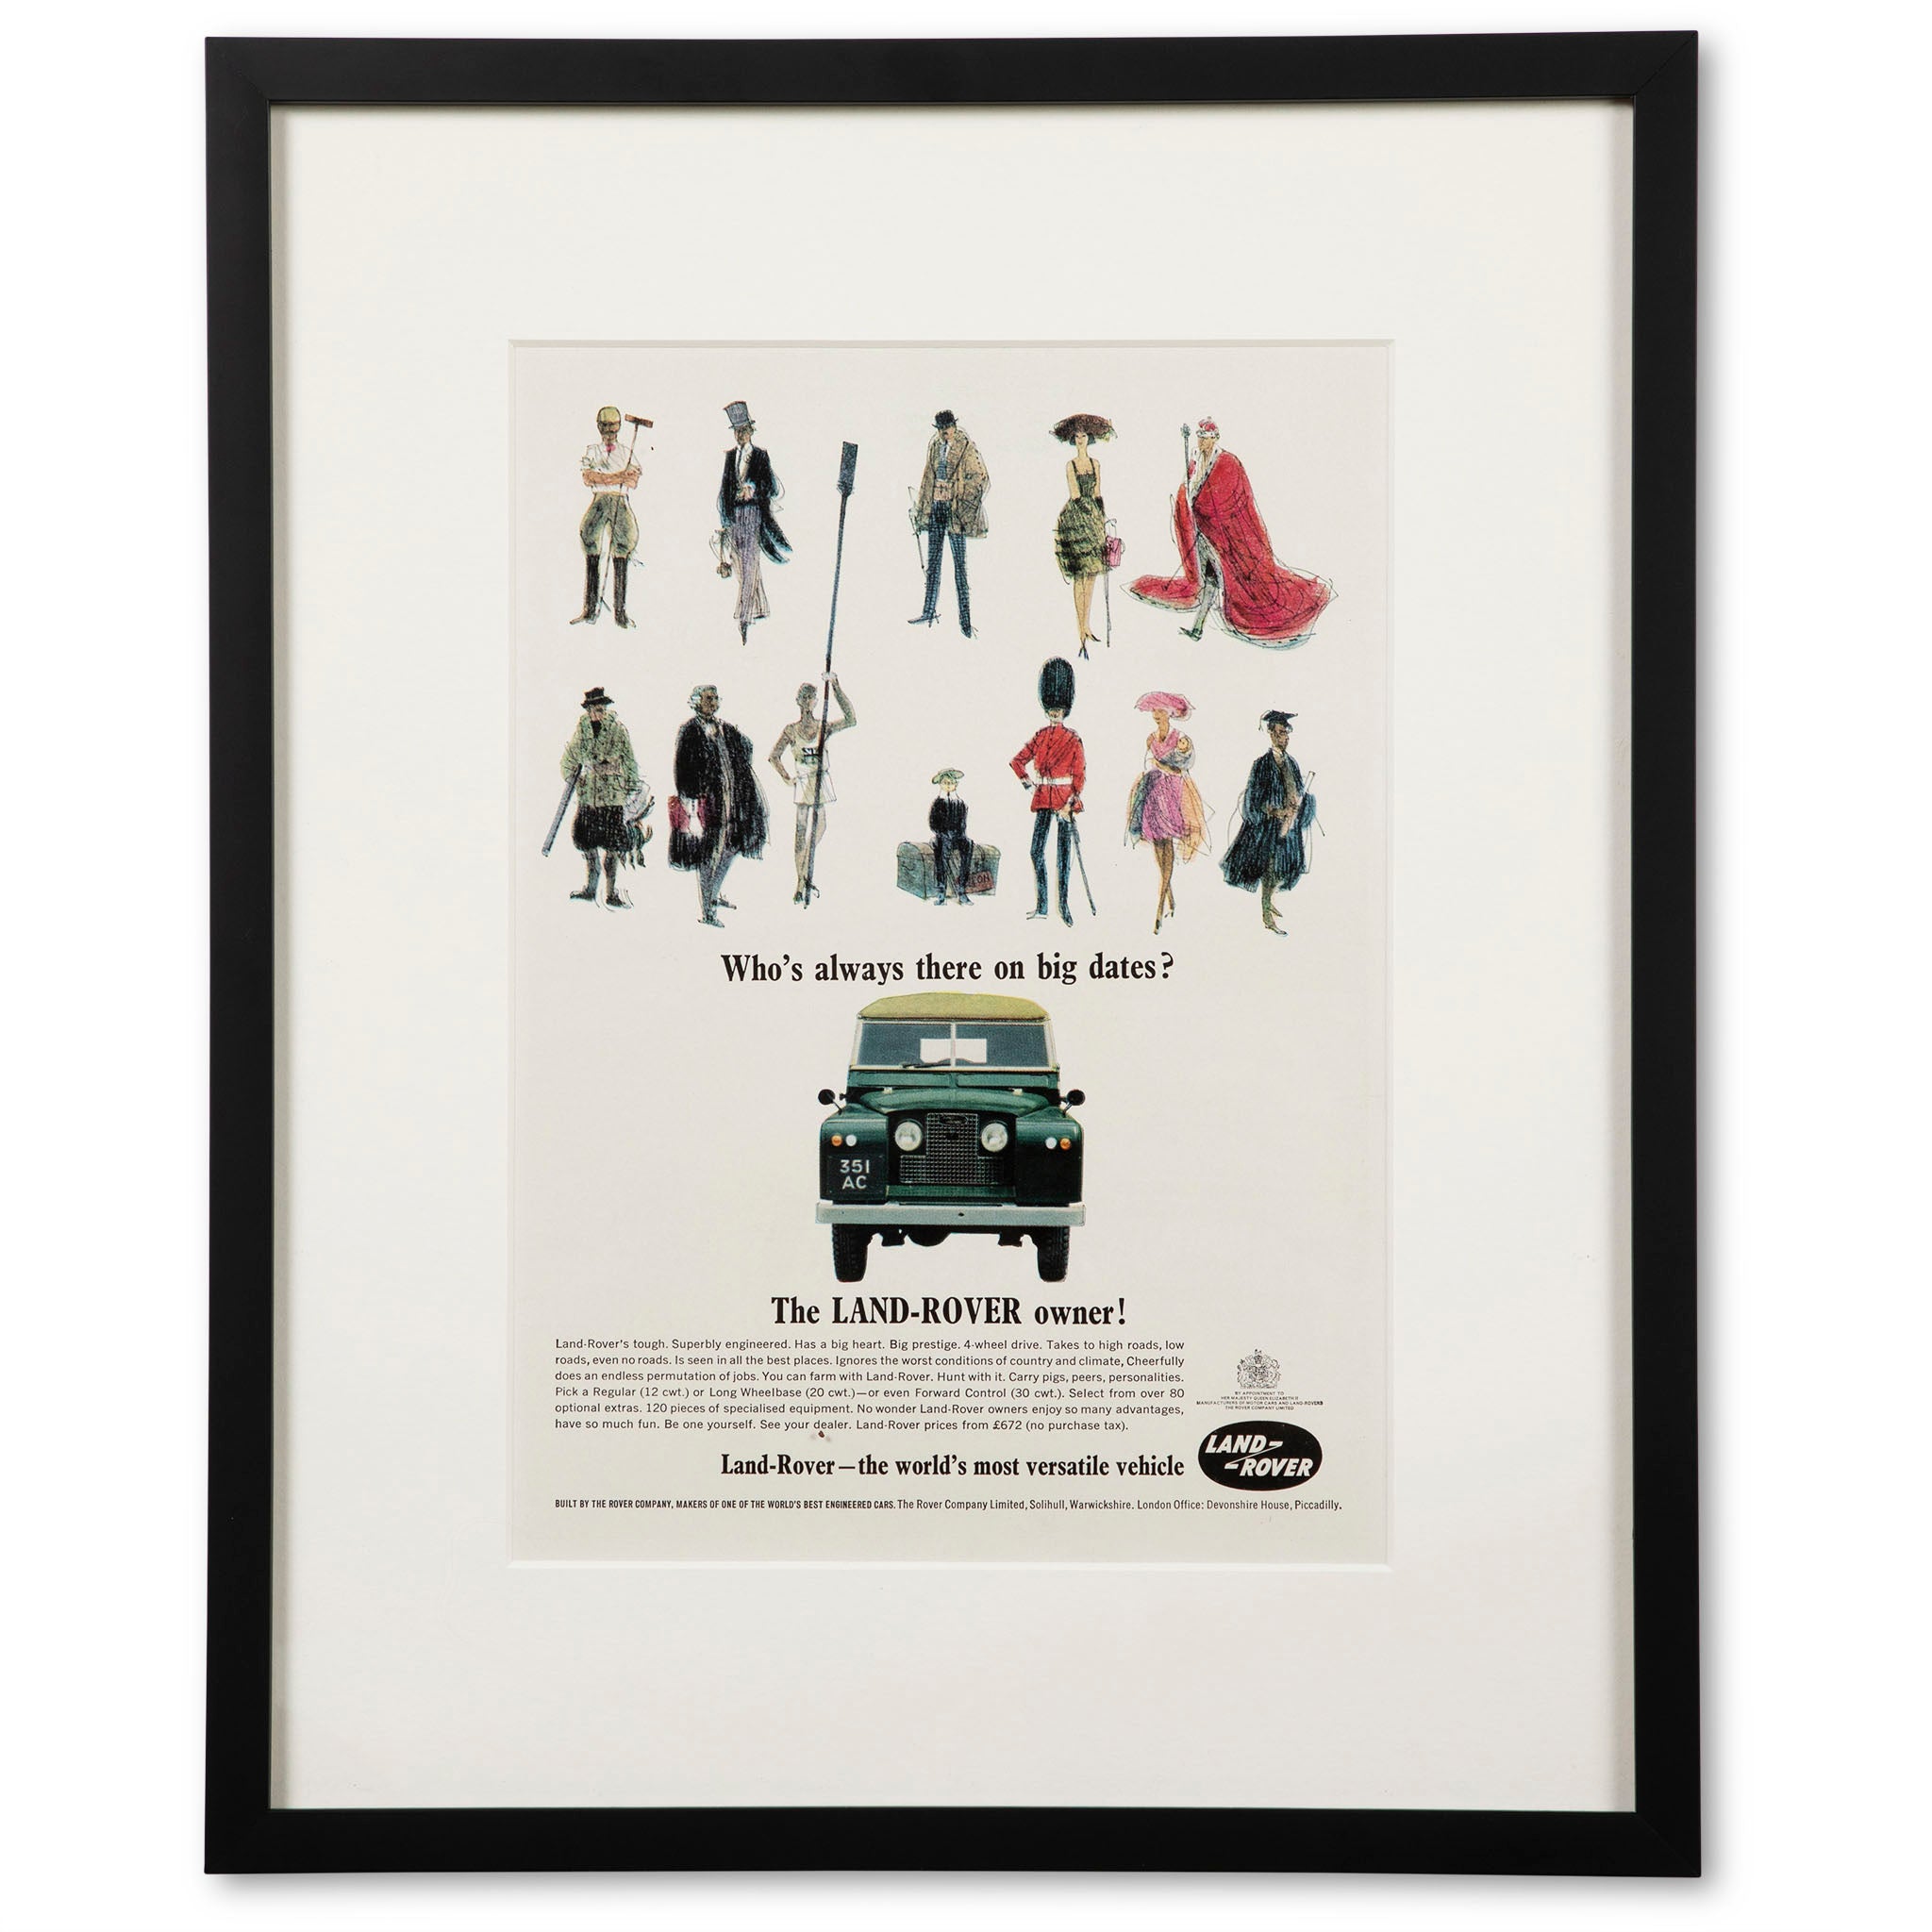 Framed the Land-Rover Owner! Advertisement